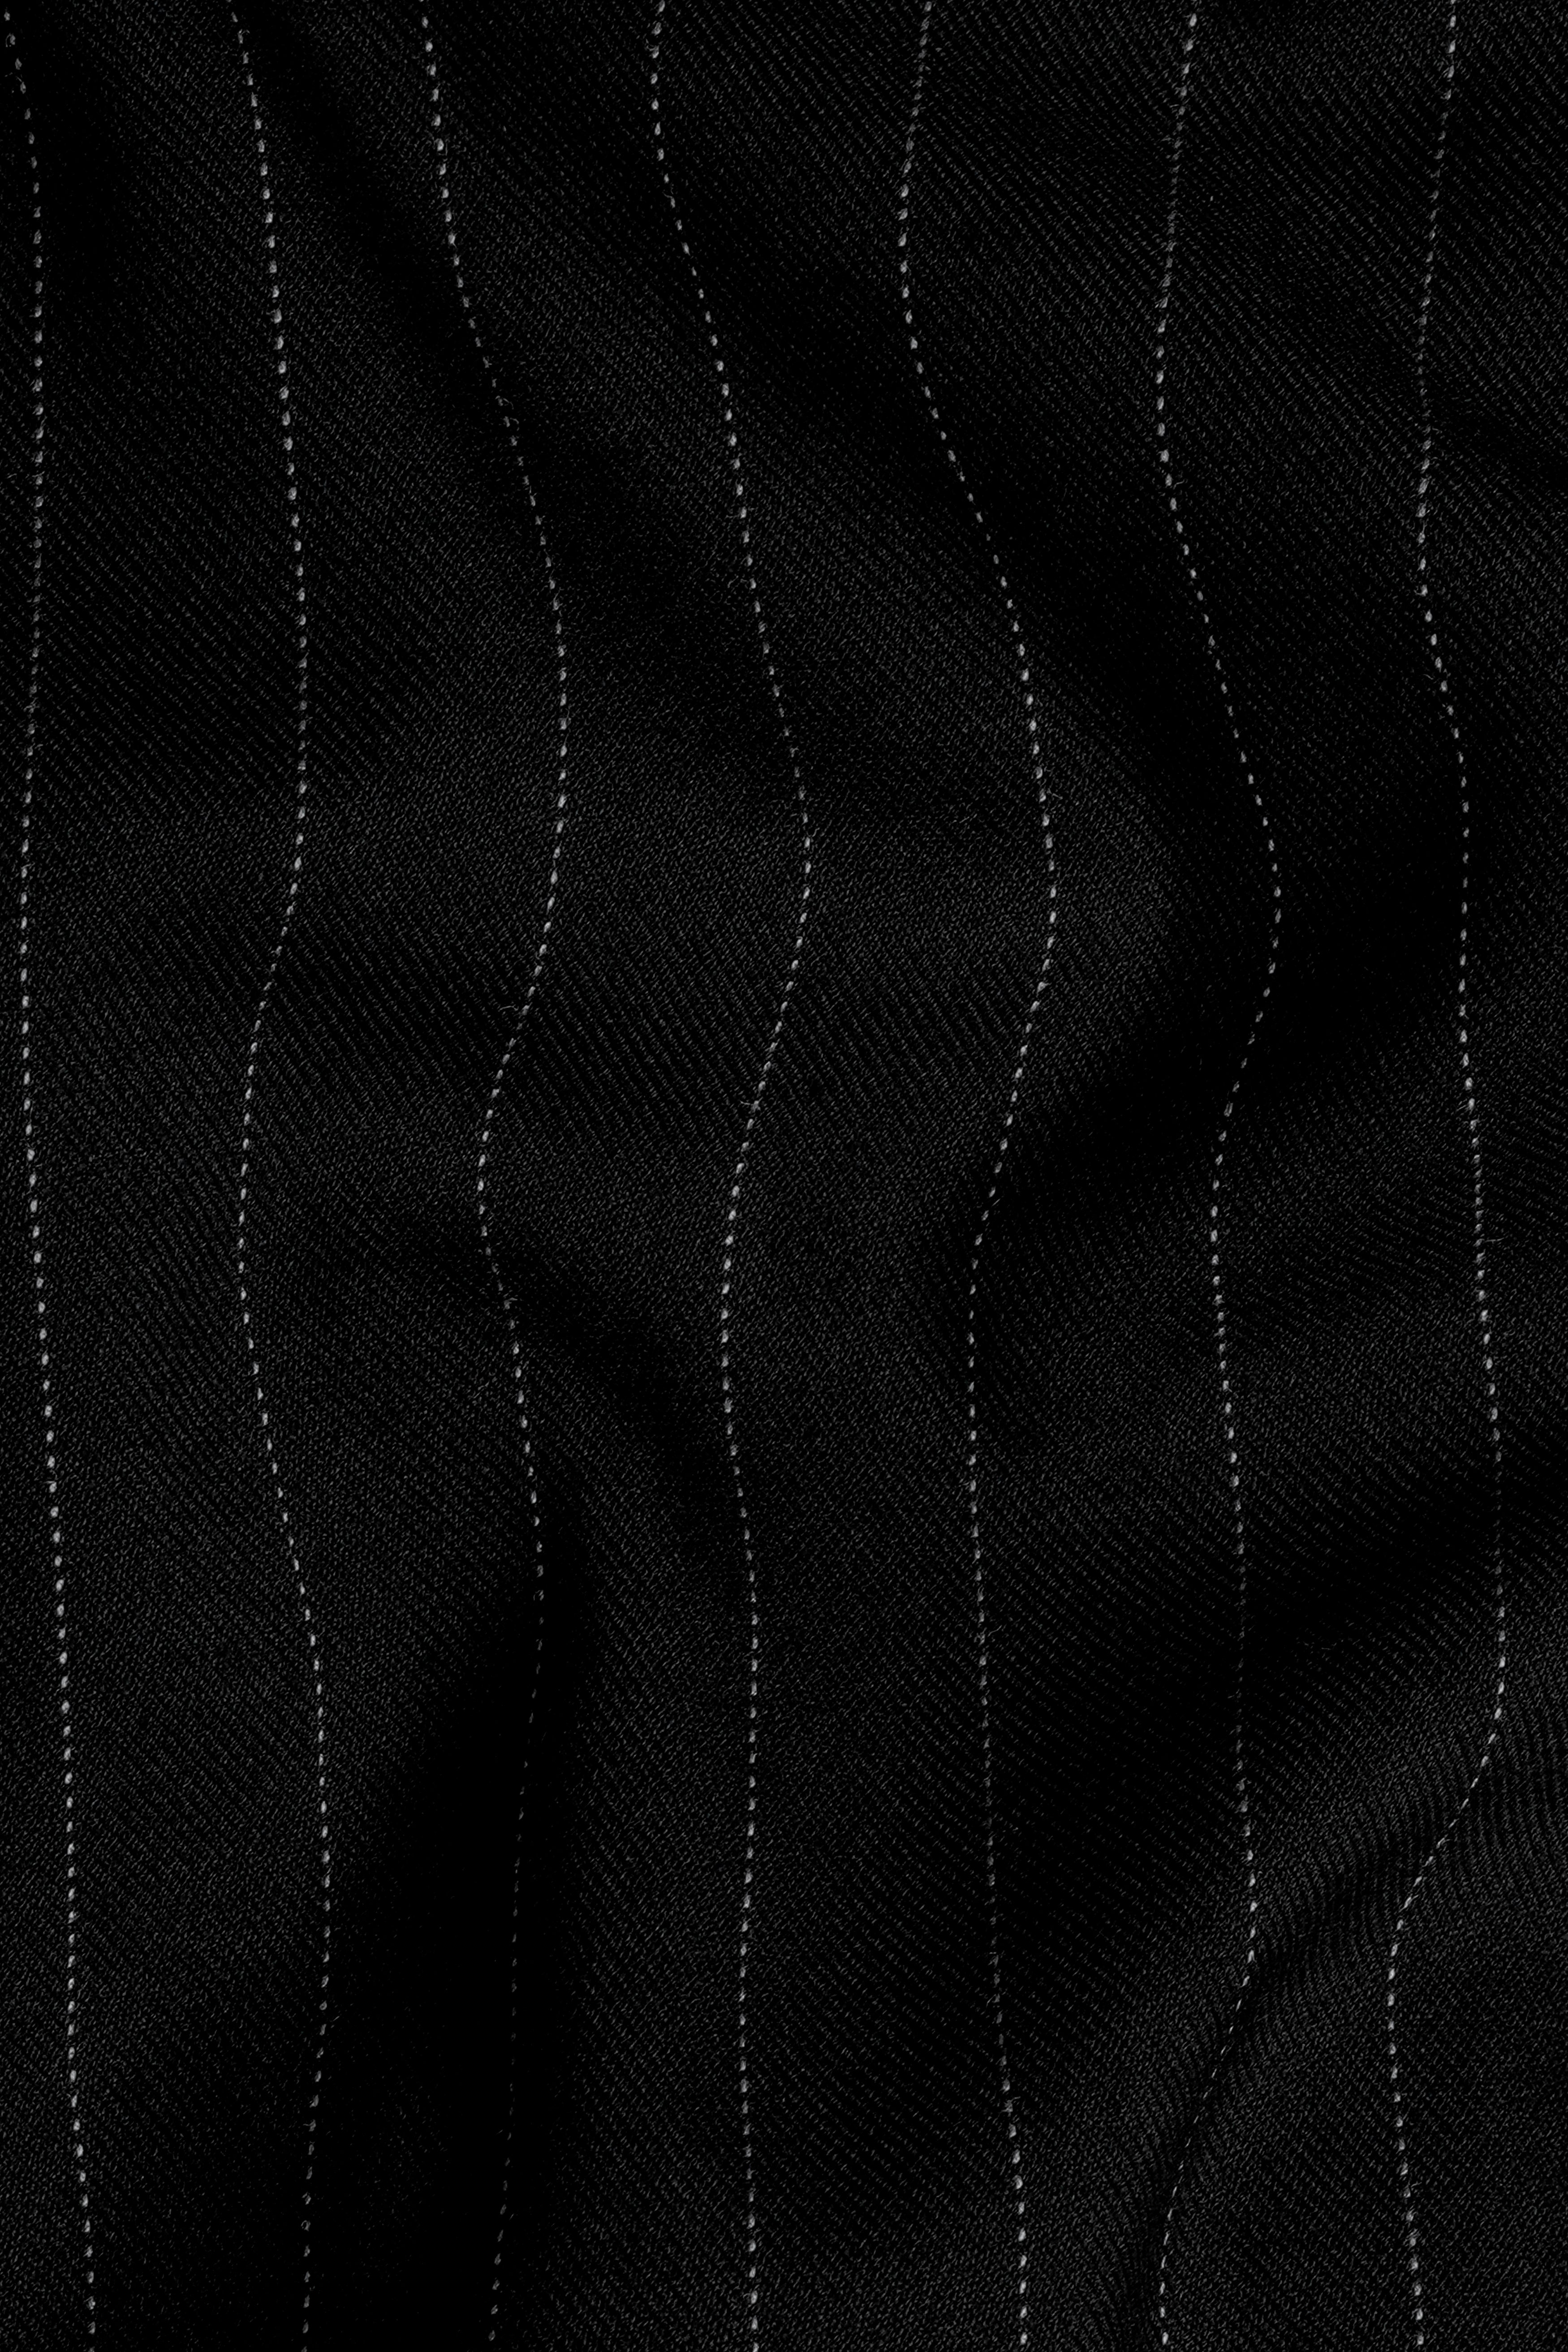 Jade Black and White Pin Striped Wool Rich Double Breasted Suit ST3123-DB-36, ST3123-DB-38, ST3123-DB-40, ST3123-DB-42, ST3123-DB-44, ST3123-DB-46, ST3123-DB-48, ST3123-DB-50, ST3123-DB-52, ST3123-DB-54, ST3123-DB-56, ST3123-DB-58, ST3123-DB-60